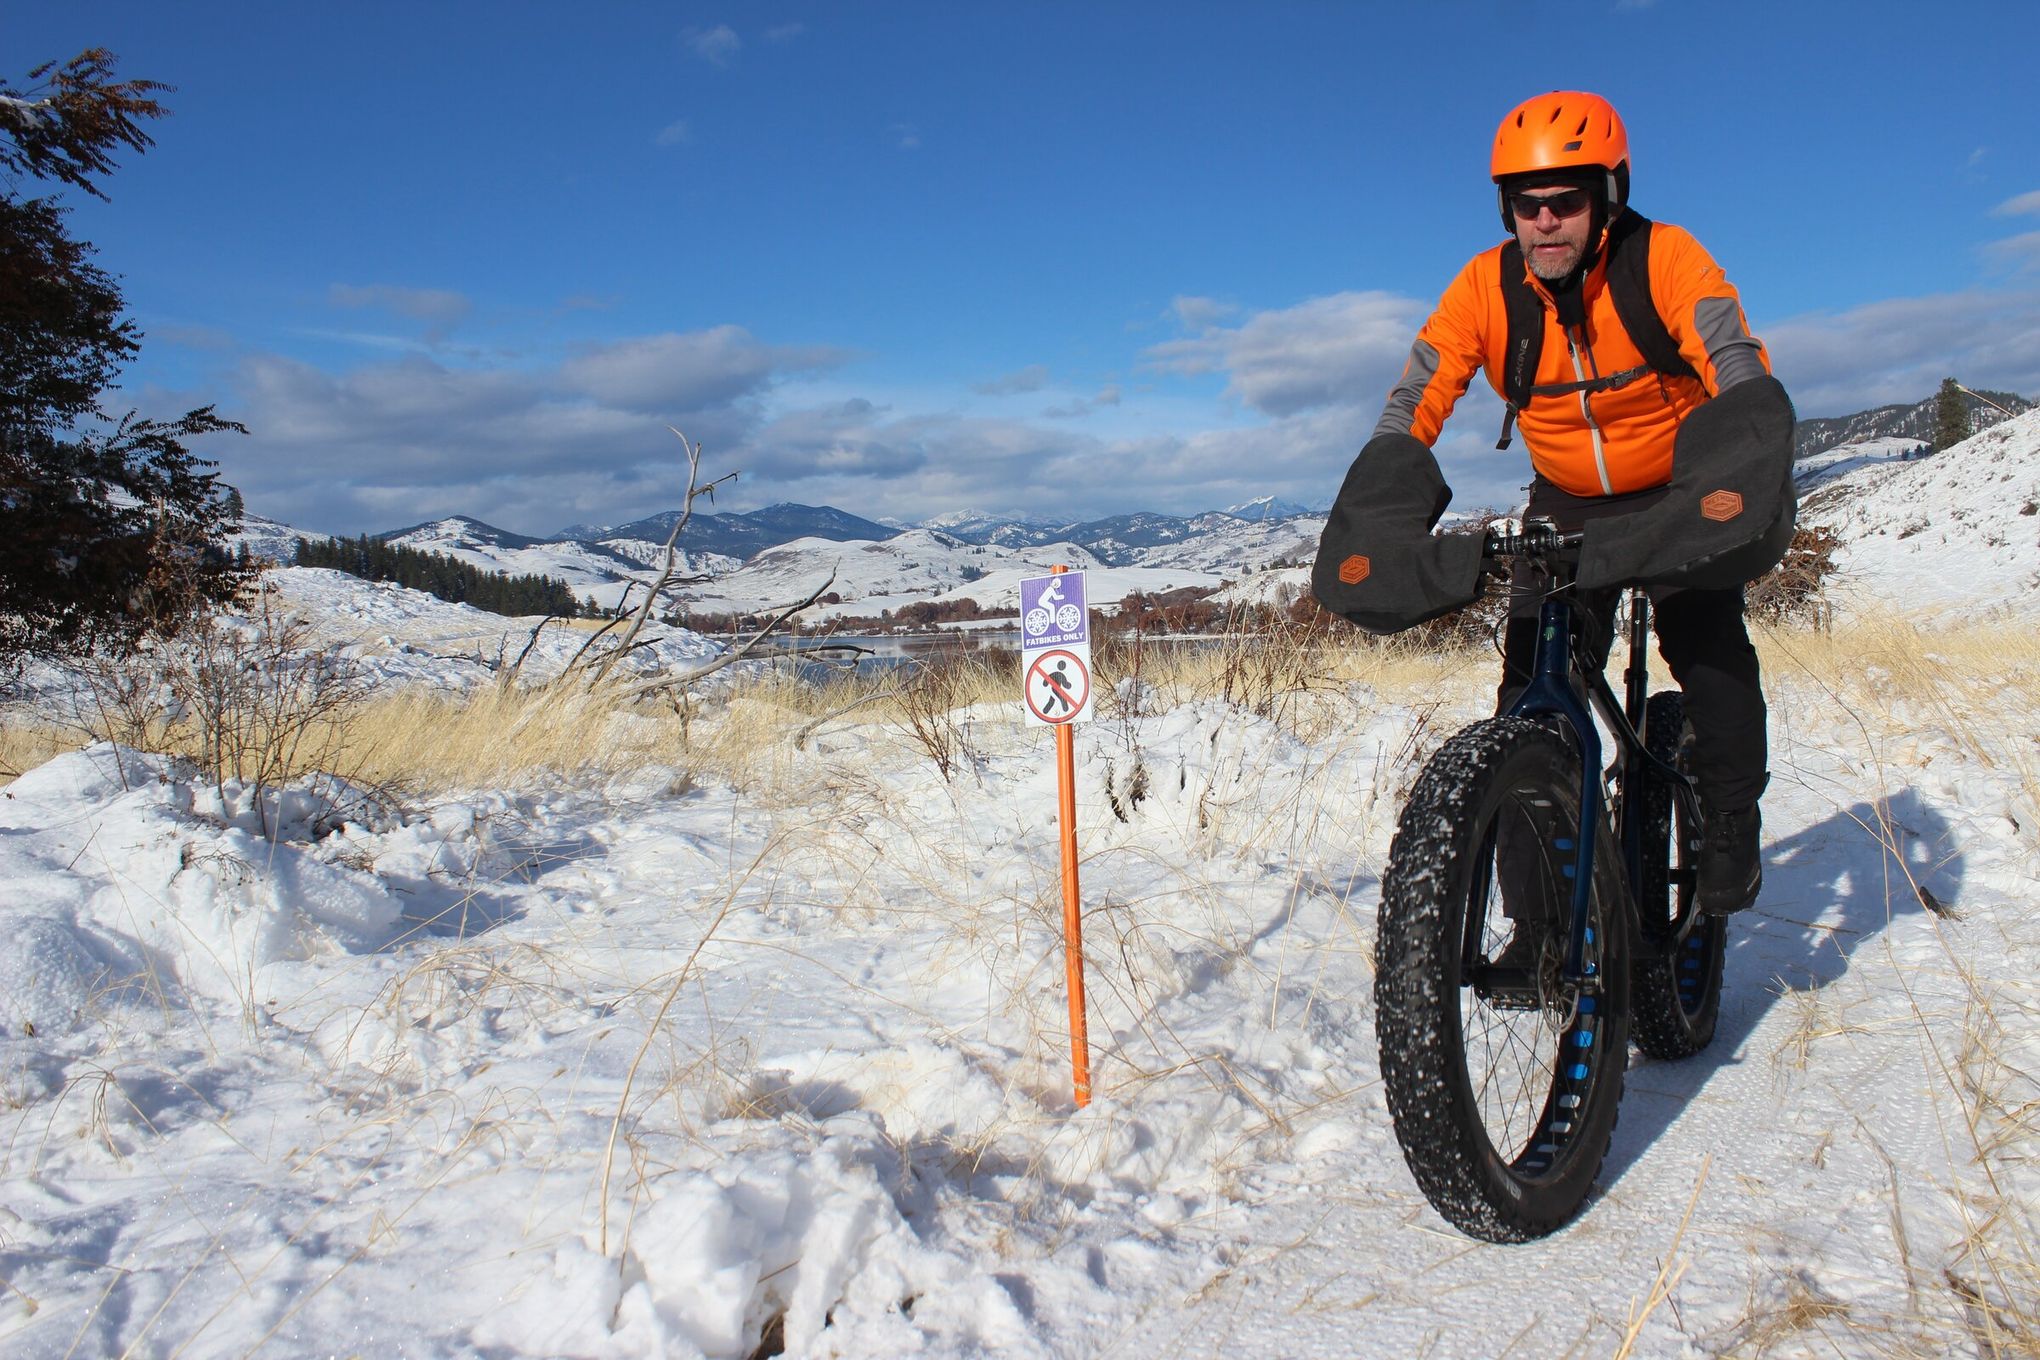 Want to cycle through the winter? Grab a fat bike and hit the snow